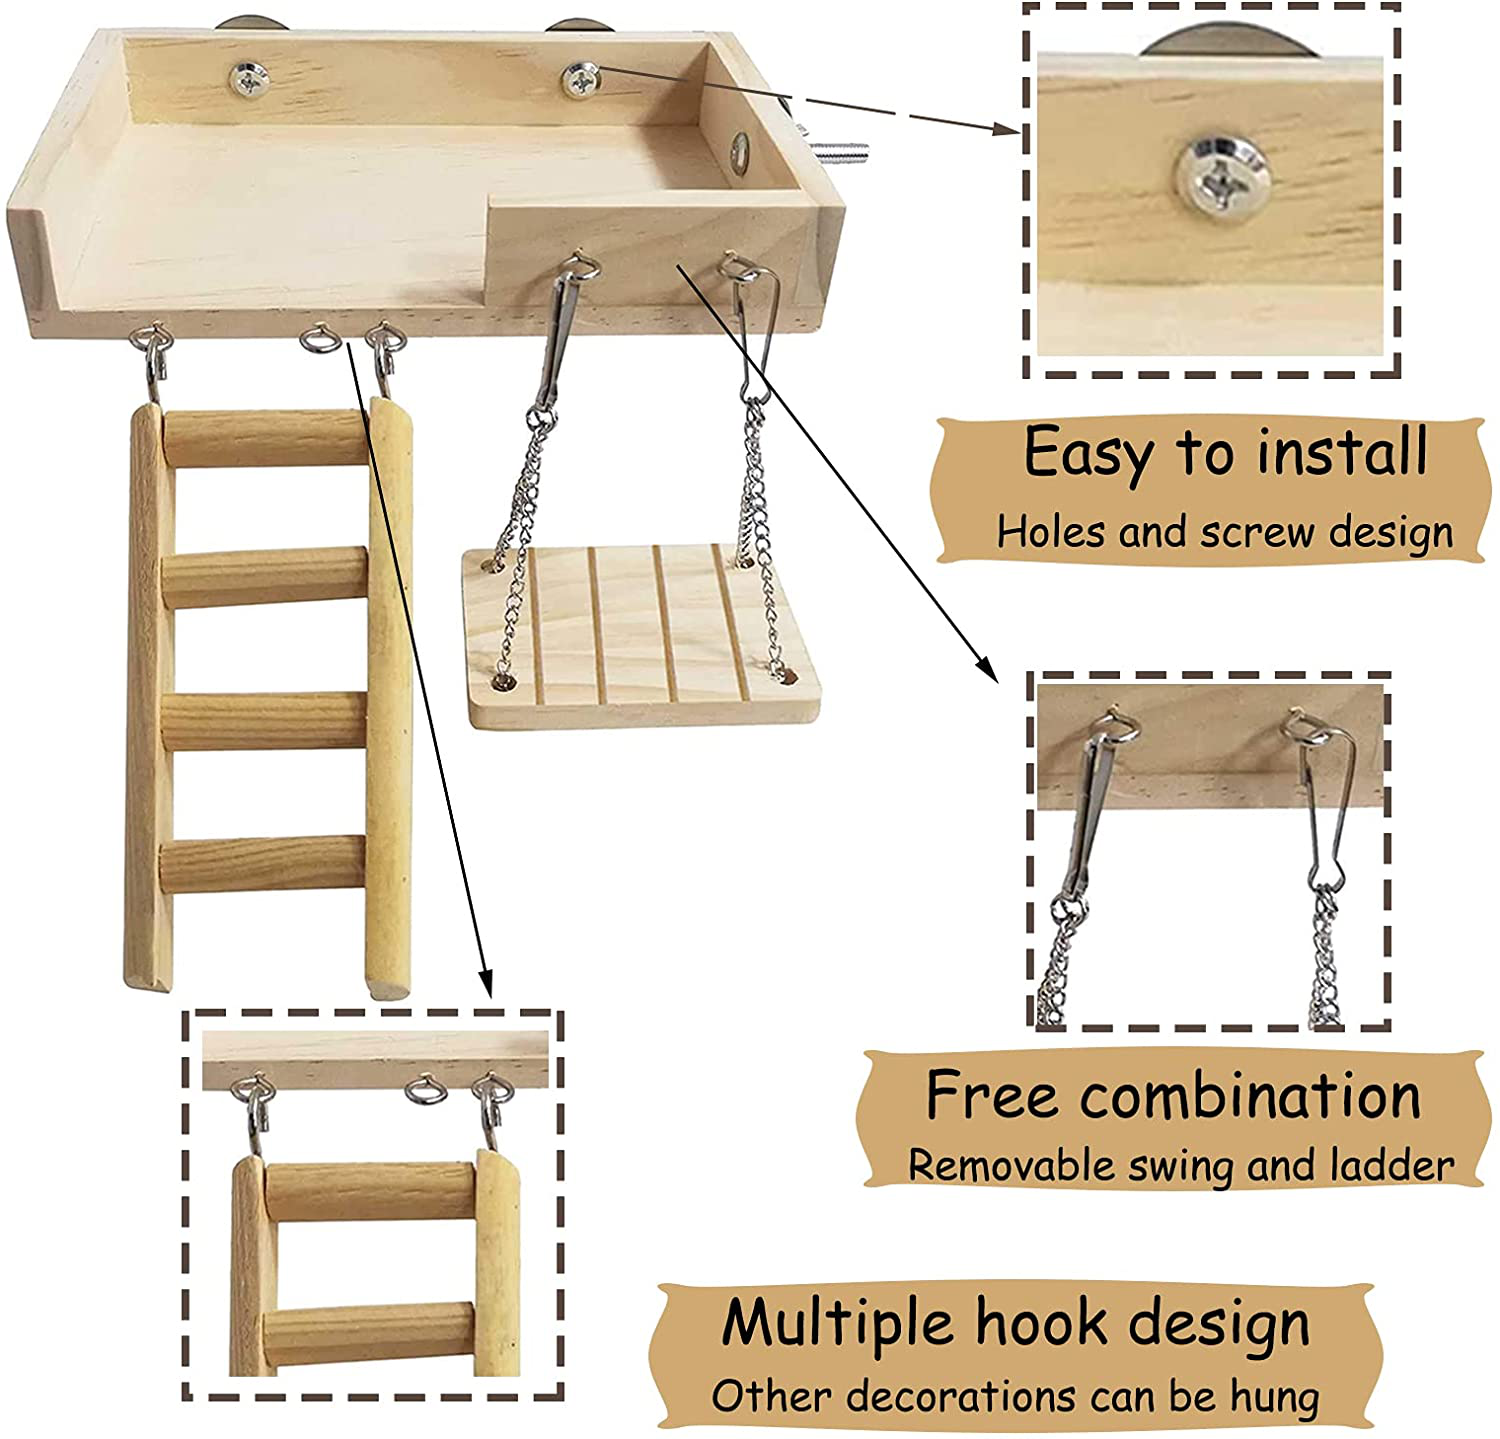 Hamiledyi Hamster Wooden Ladder Swing Platform, Guinea Pig Wood Ladder Set, Small Animal Toy Cage Accessories Seesaw for Gerbil Hedgehog Syrian Hamster Rat Chinchilla